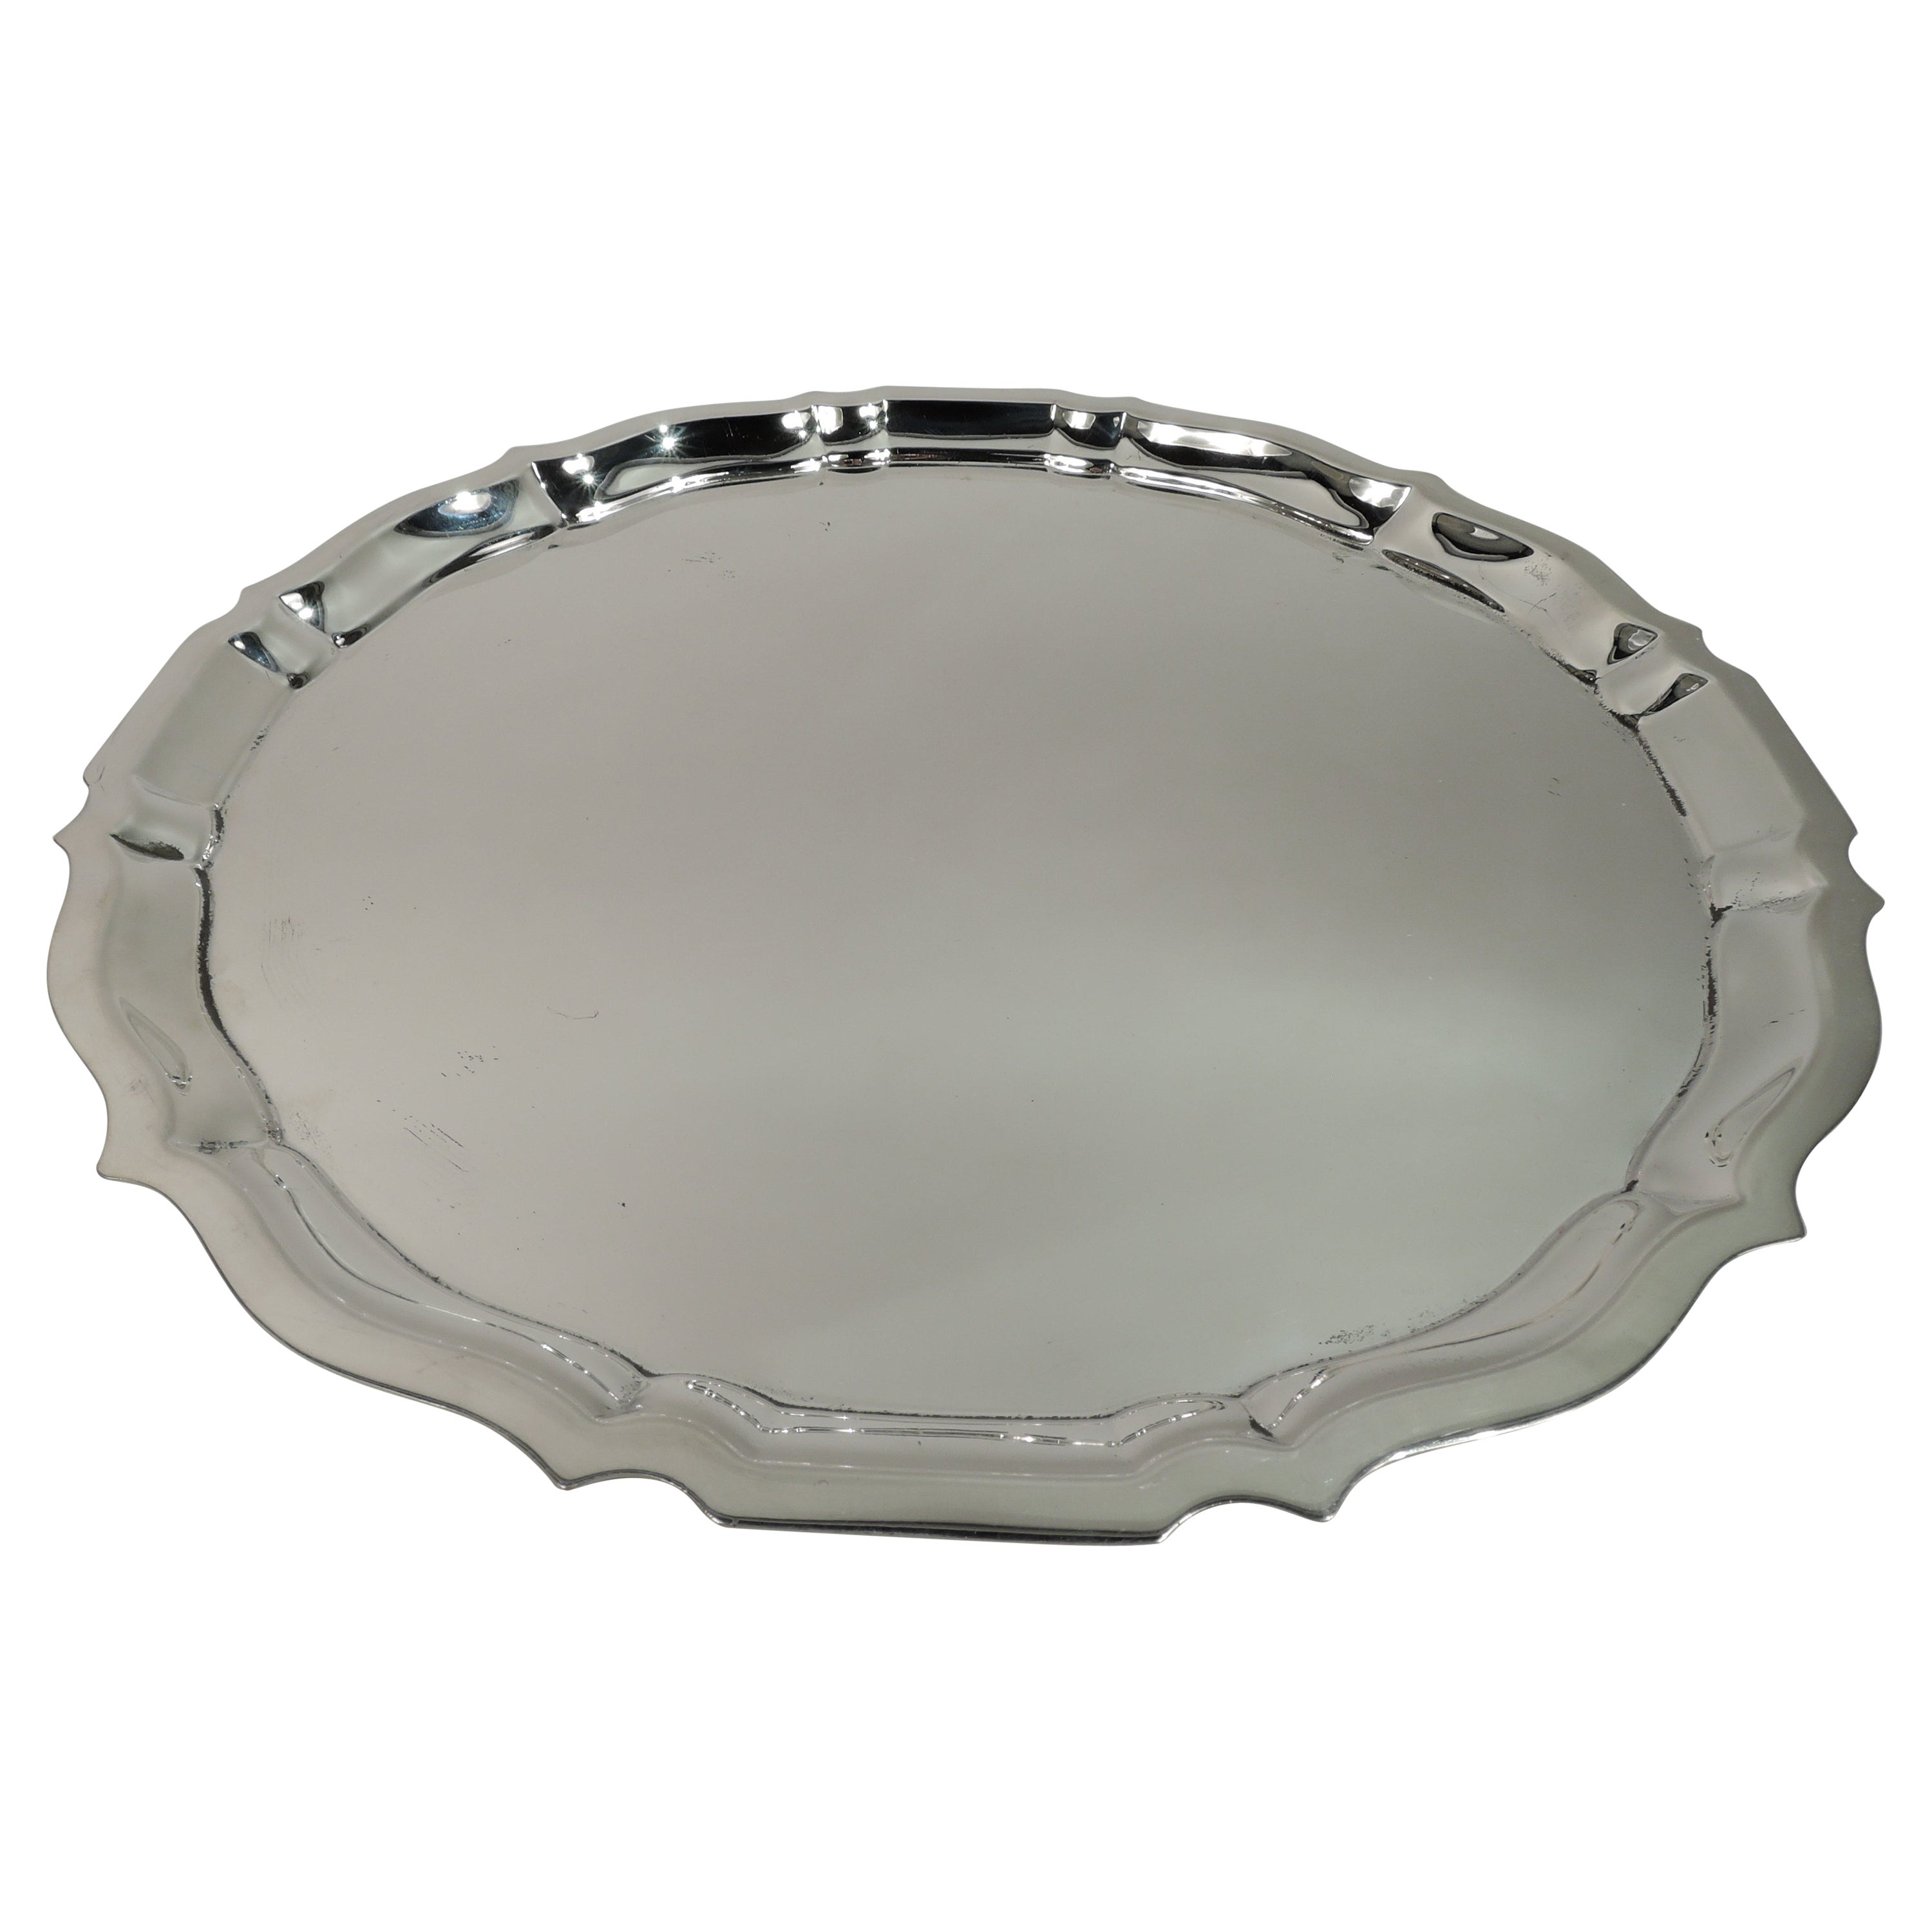 Large and Heavy Gorham Chippendale Sterling Silver Serving Tray